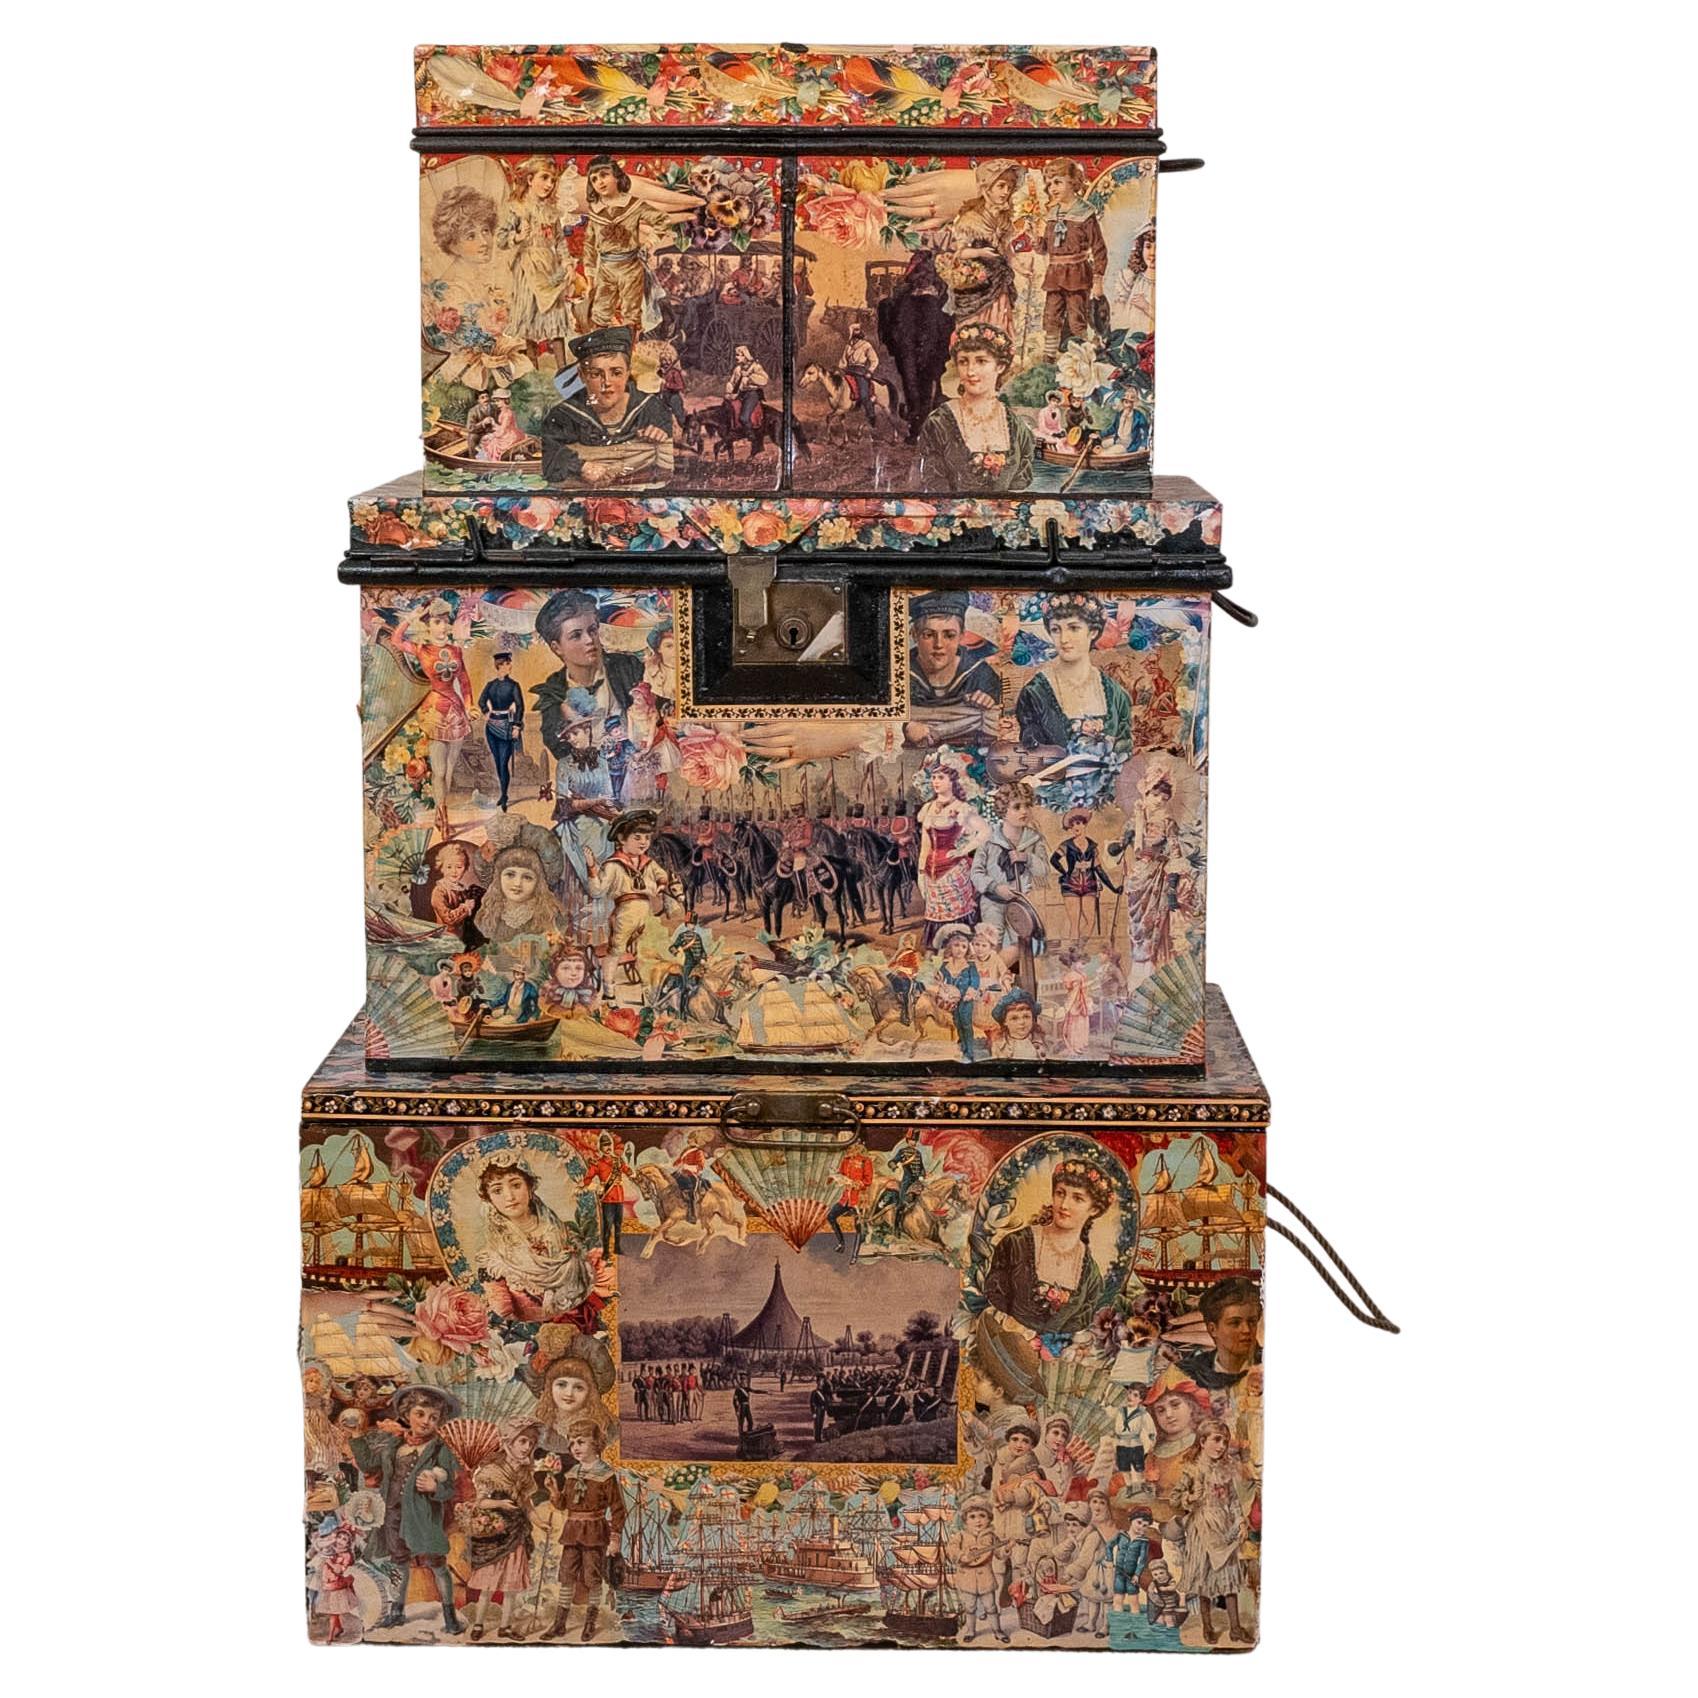 Charming Set of 3 Victorian Artful Hand Decoupaged Storage Trunks For Sale